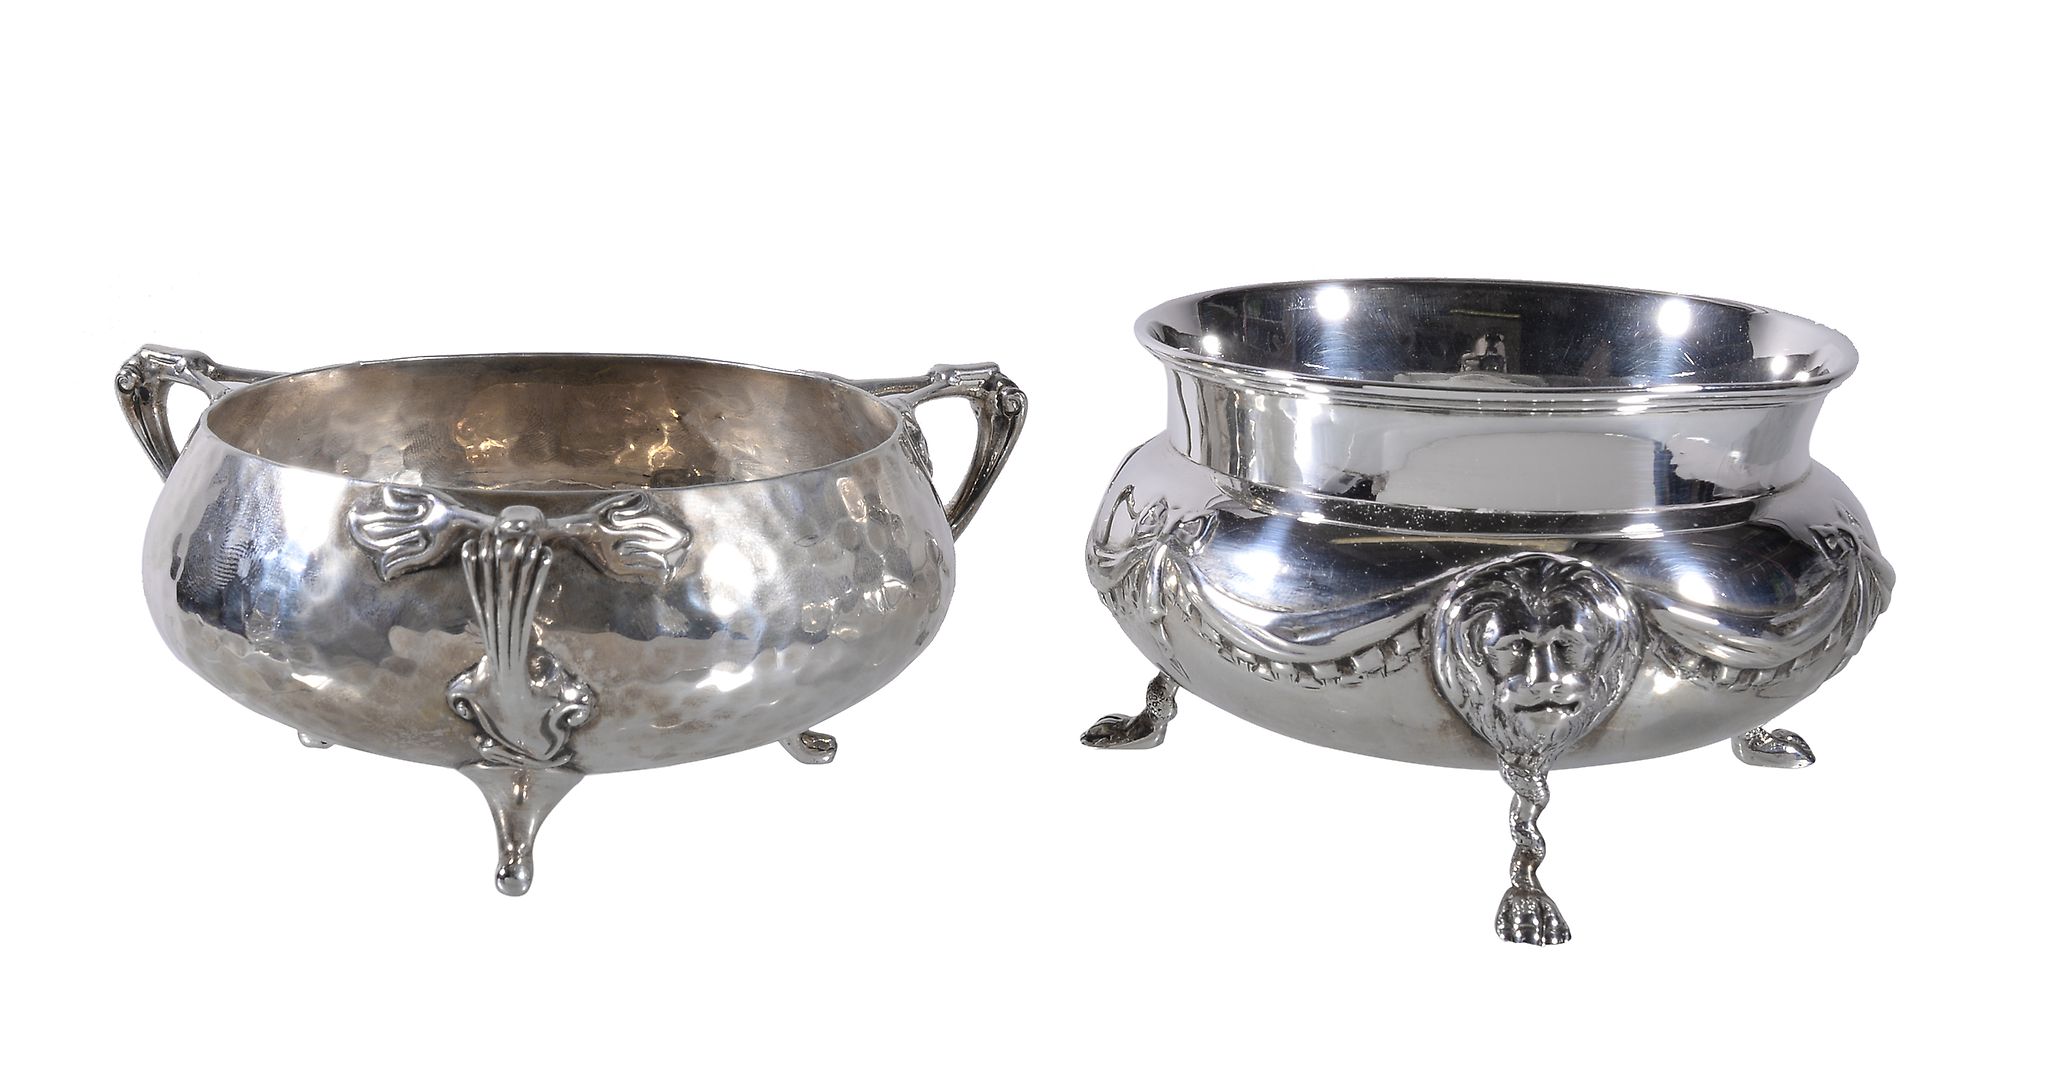 Two Edwardian silver sugar bowls, the first Arts and Crafts by Charles Edwards, London 1904,